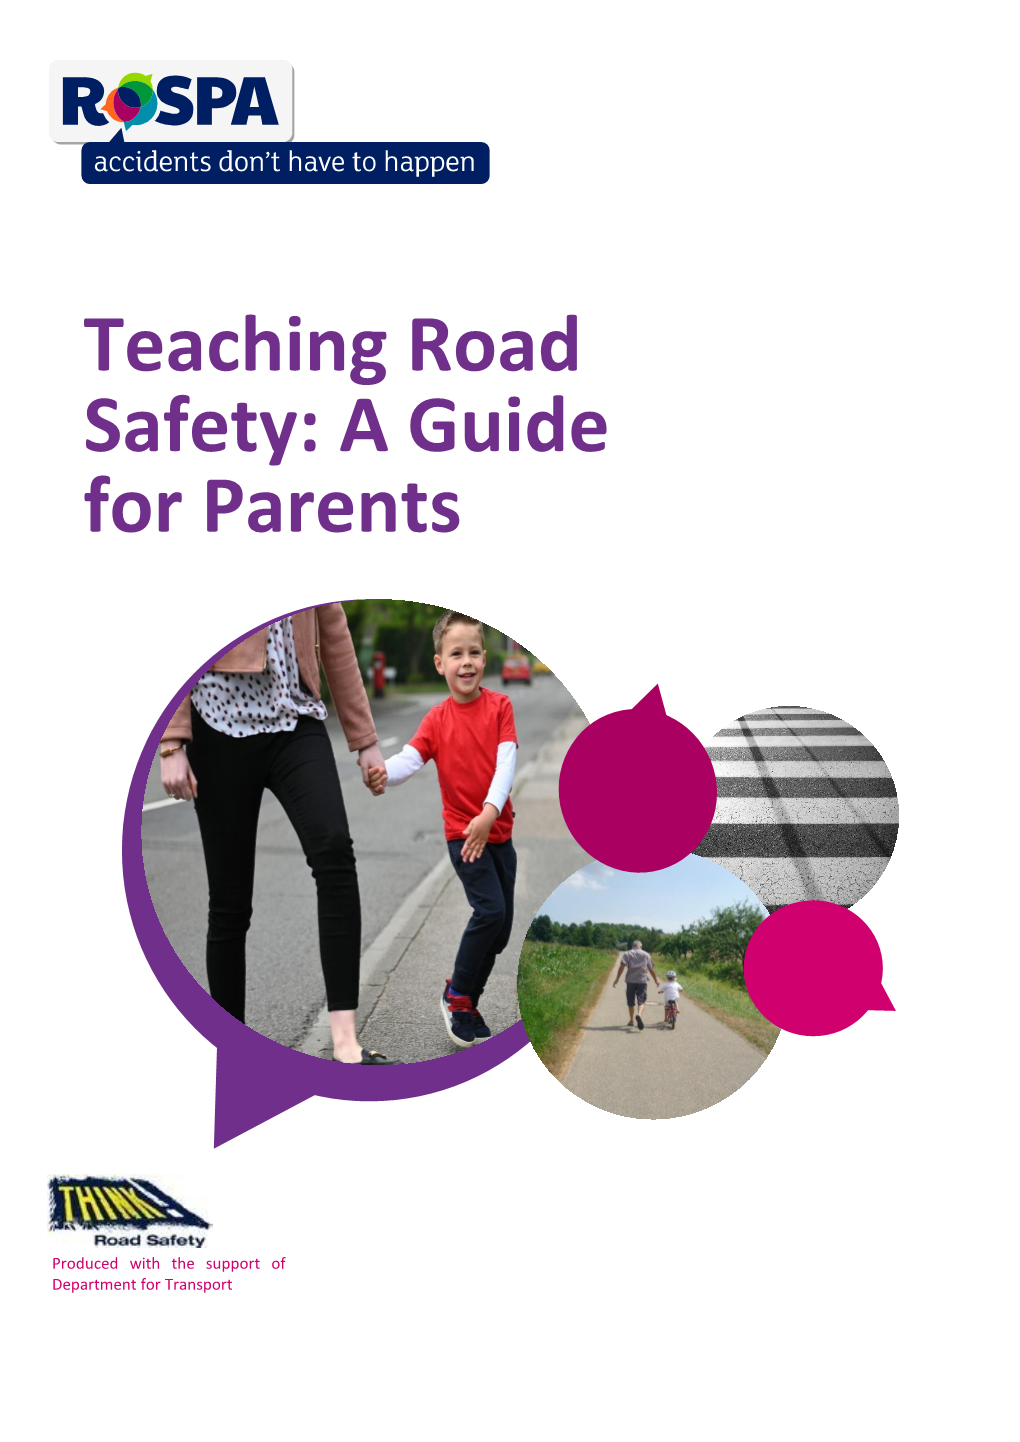 Teaching Road Safety: a Guide for Parents